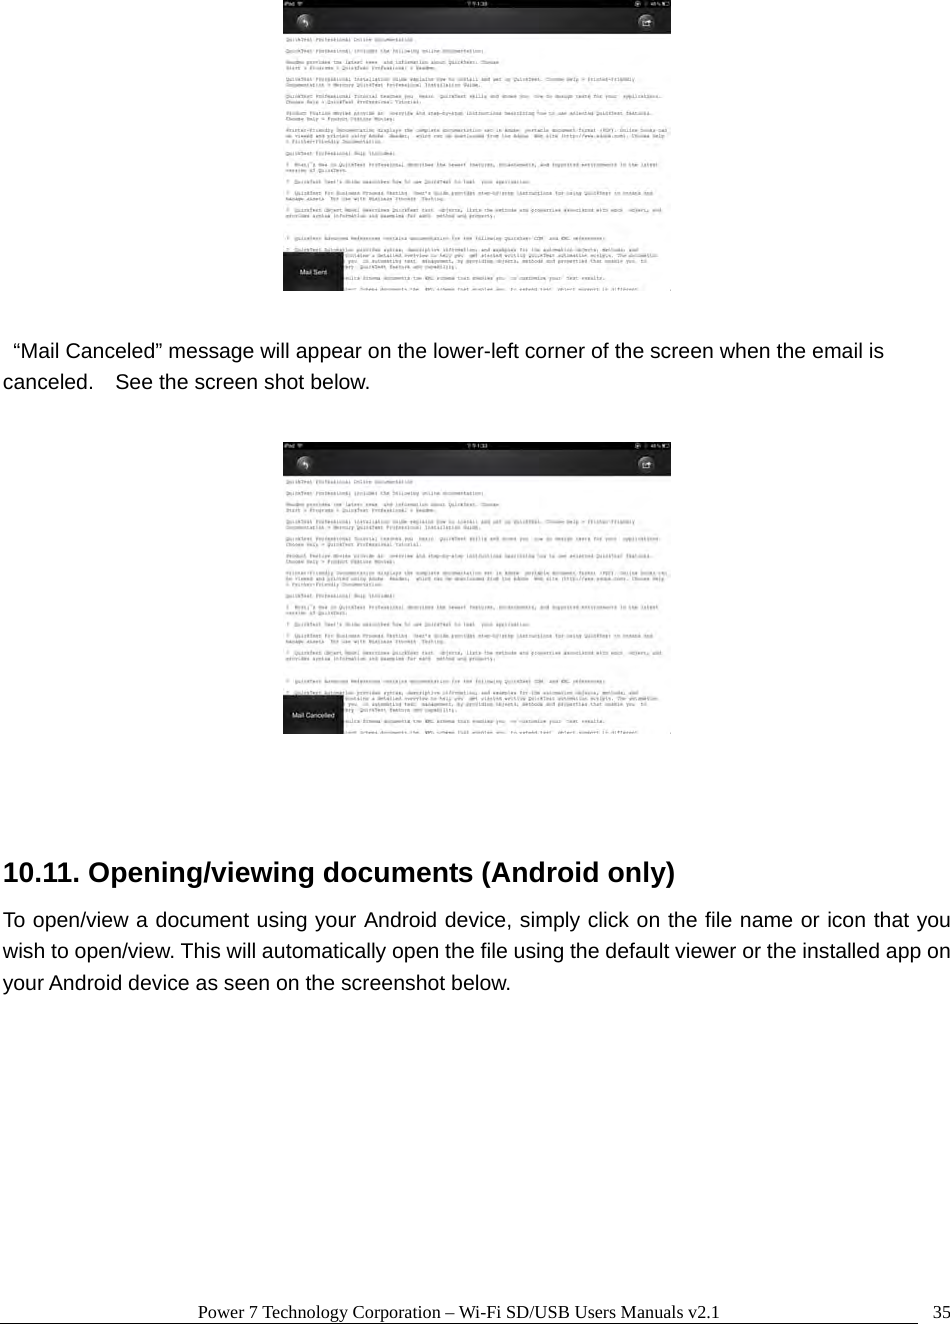 Power 7 Technology Corporation – Wi-Fi SD/USB Users Manuals v2.1  35    “Mail Canceled” message will appear on the lower-left corner of the screen when the email is canceled.    See the screen shot below.     10.11. Opening/viewing documents (Android only) To open/view a document using your Android device, simply click on the file name or icon that you wish to open/view. This will automatically open the file using the default viewer or the installed app on your Android device as seen on the screenshot below.  